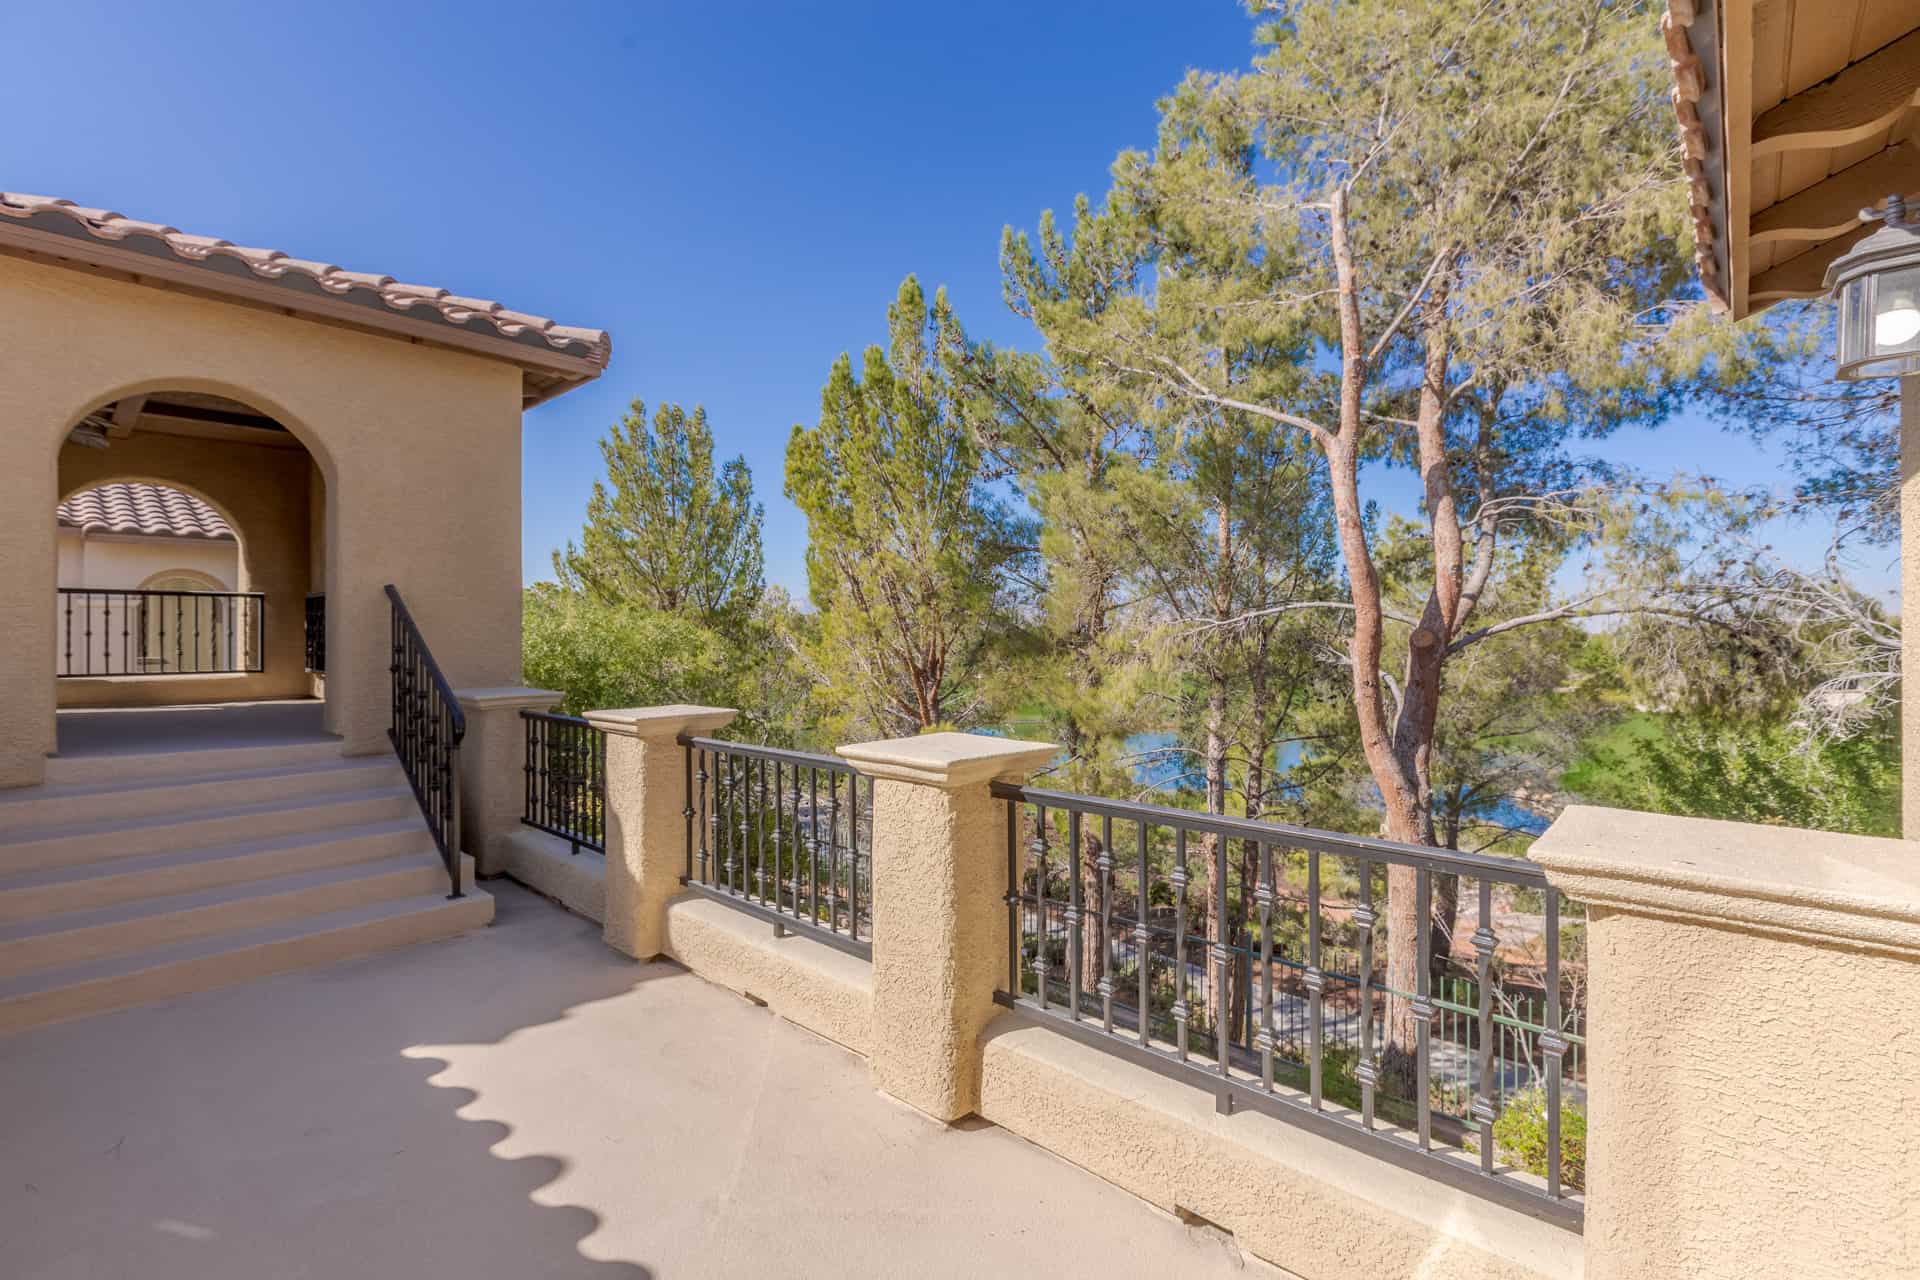 las-vegas-luxry-real-estate-realtor-rob-jensen-company-11772-canons-brooks-drive-southern-highlands34